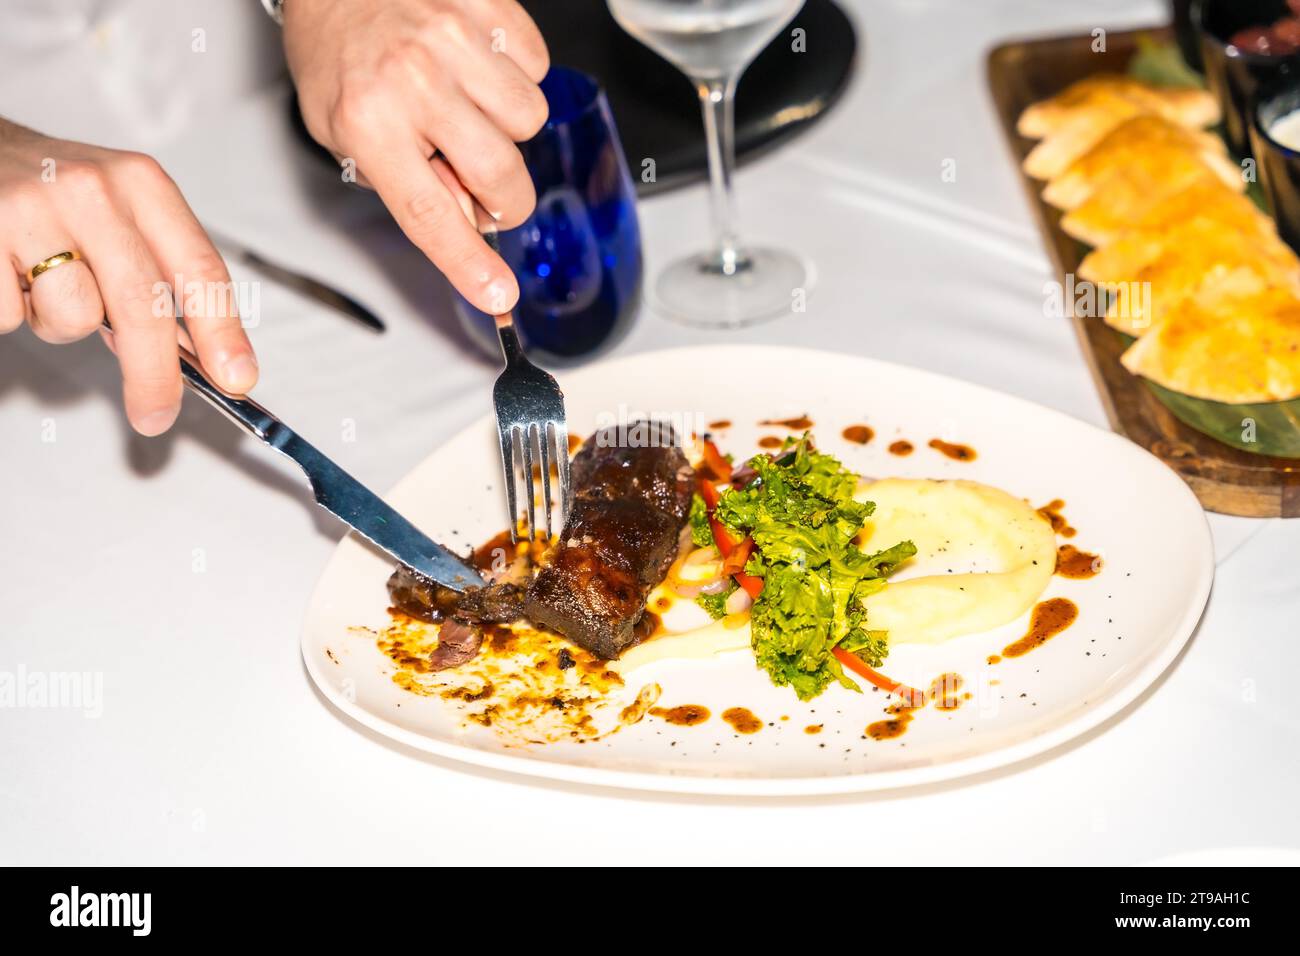 Top view of a man cutting meat in a luxury restaurant Stock Photo